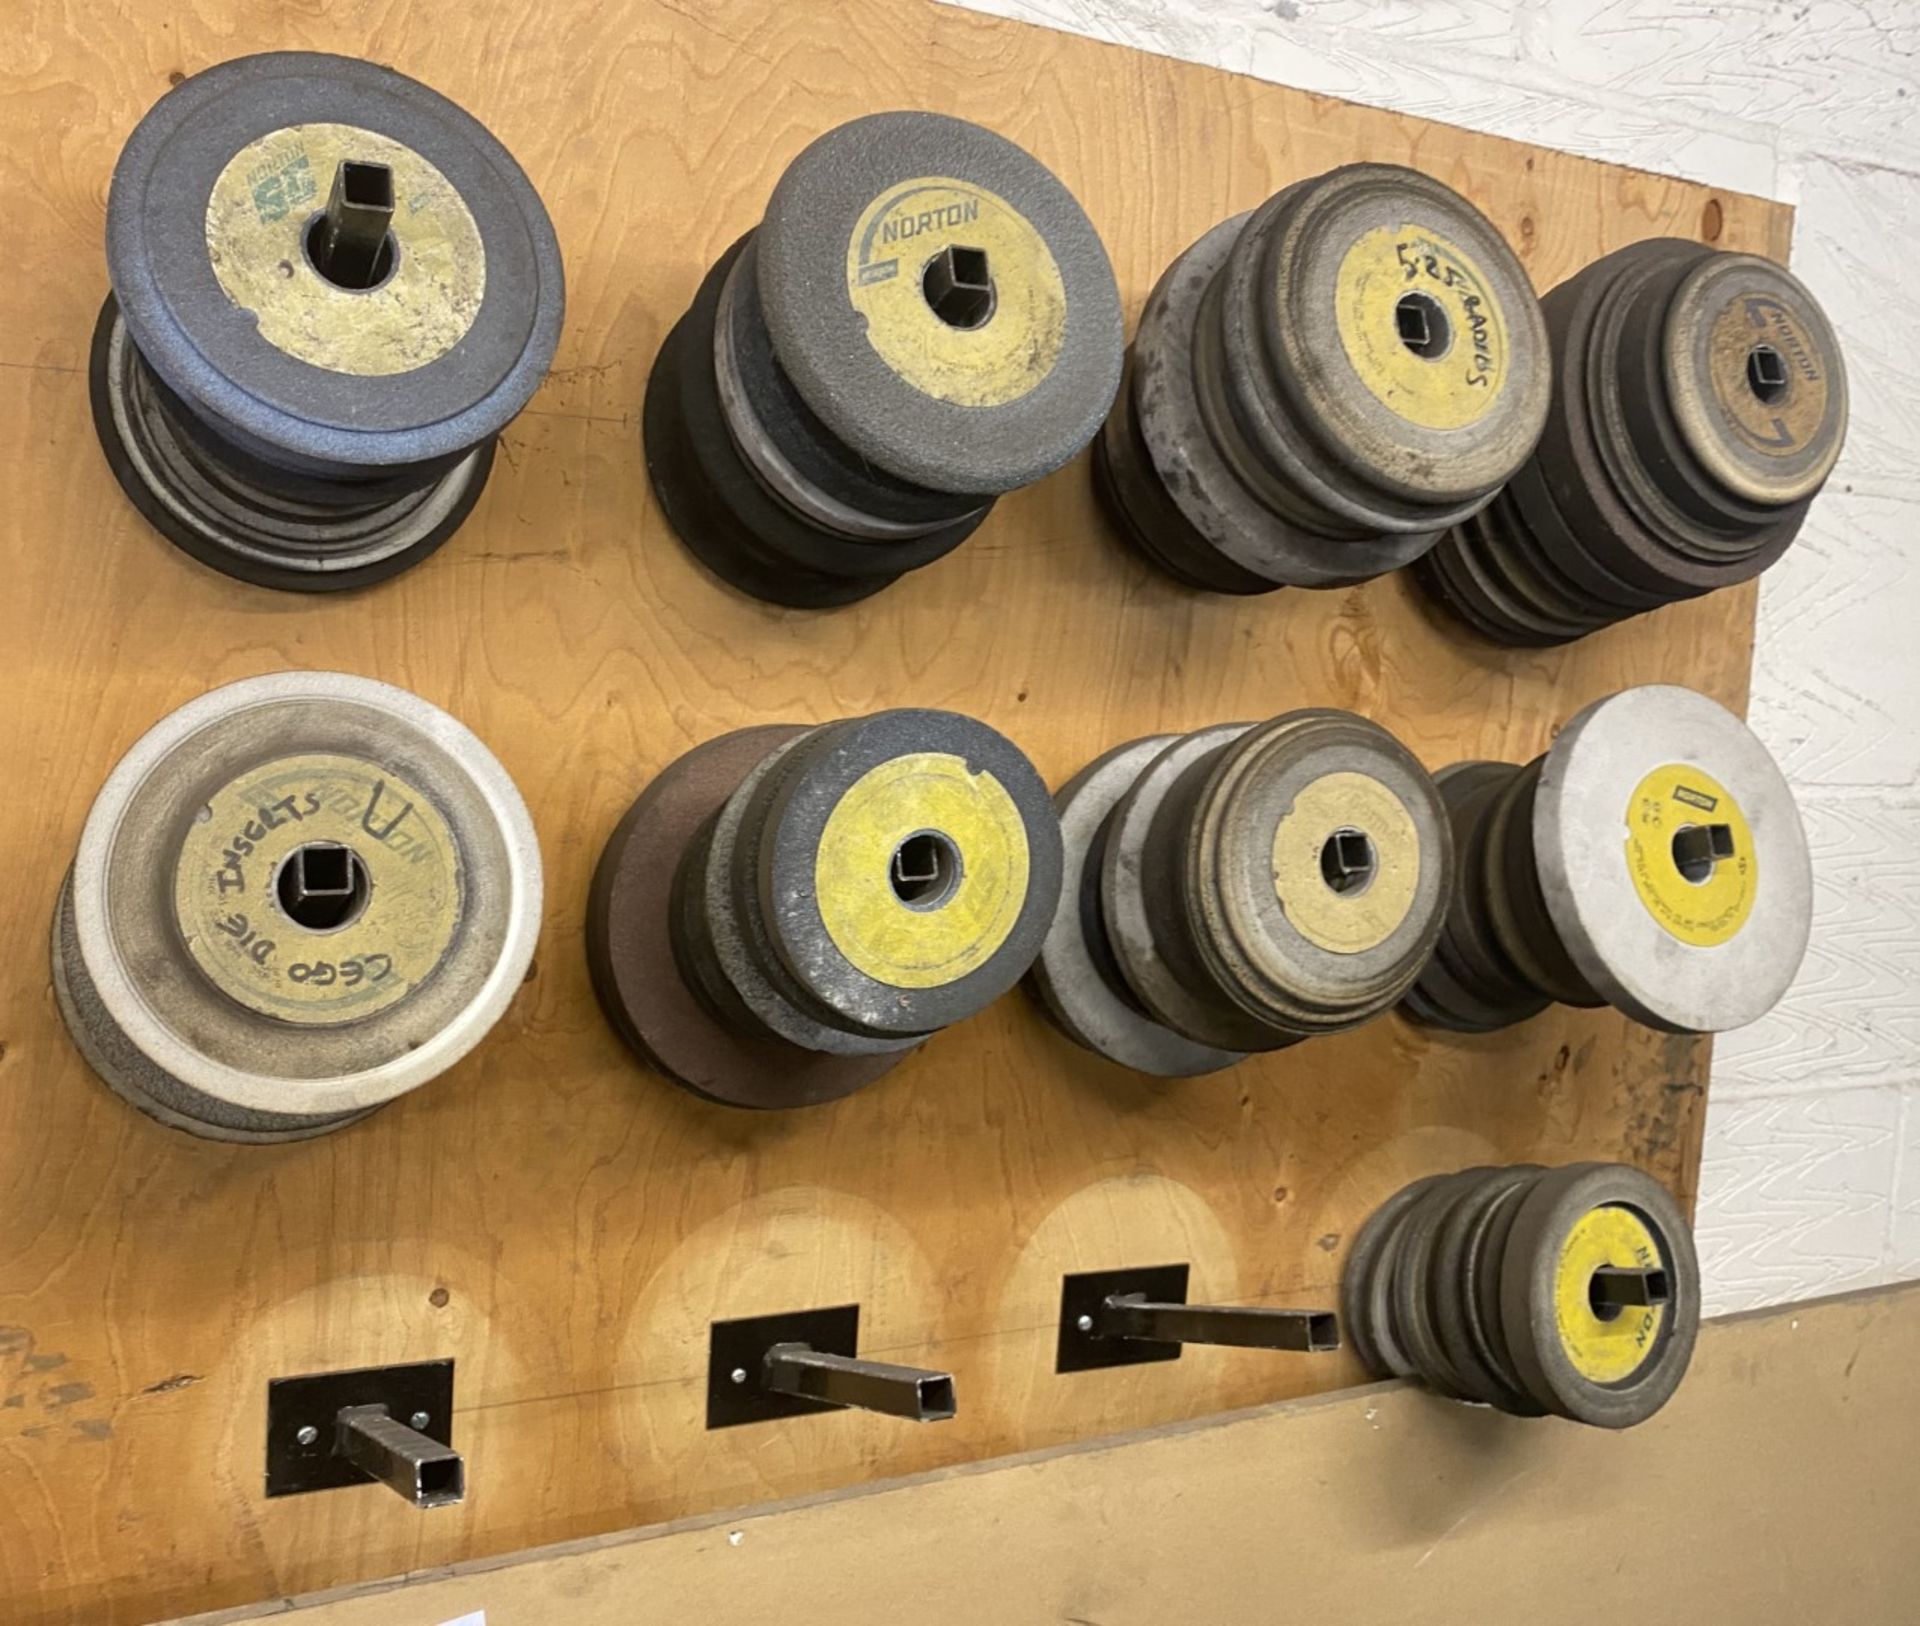 1 x Large Assortment of Grinding Discs With Wall Mounted Holder